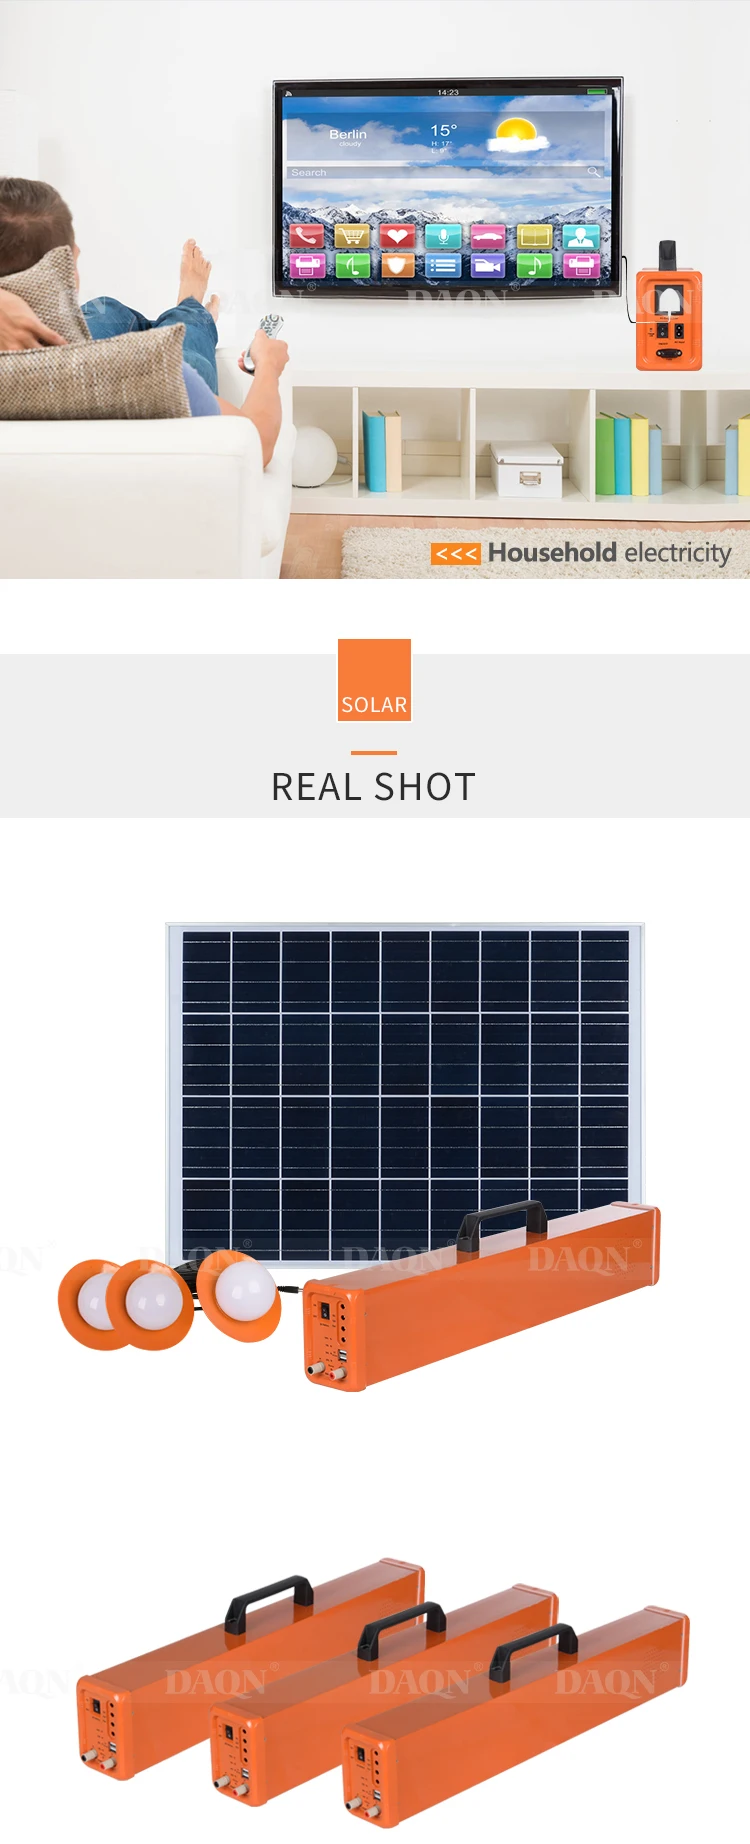 High quality off-grid solar power home multifunction interface 200w solar energy system